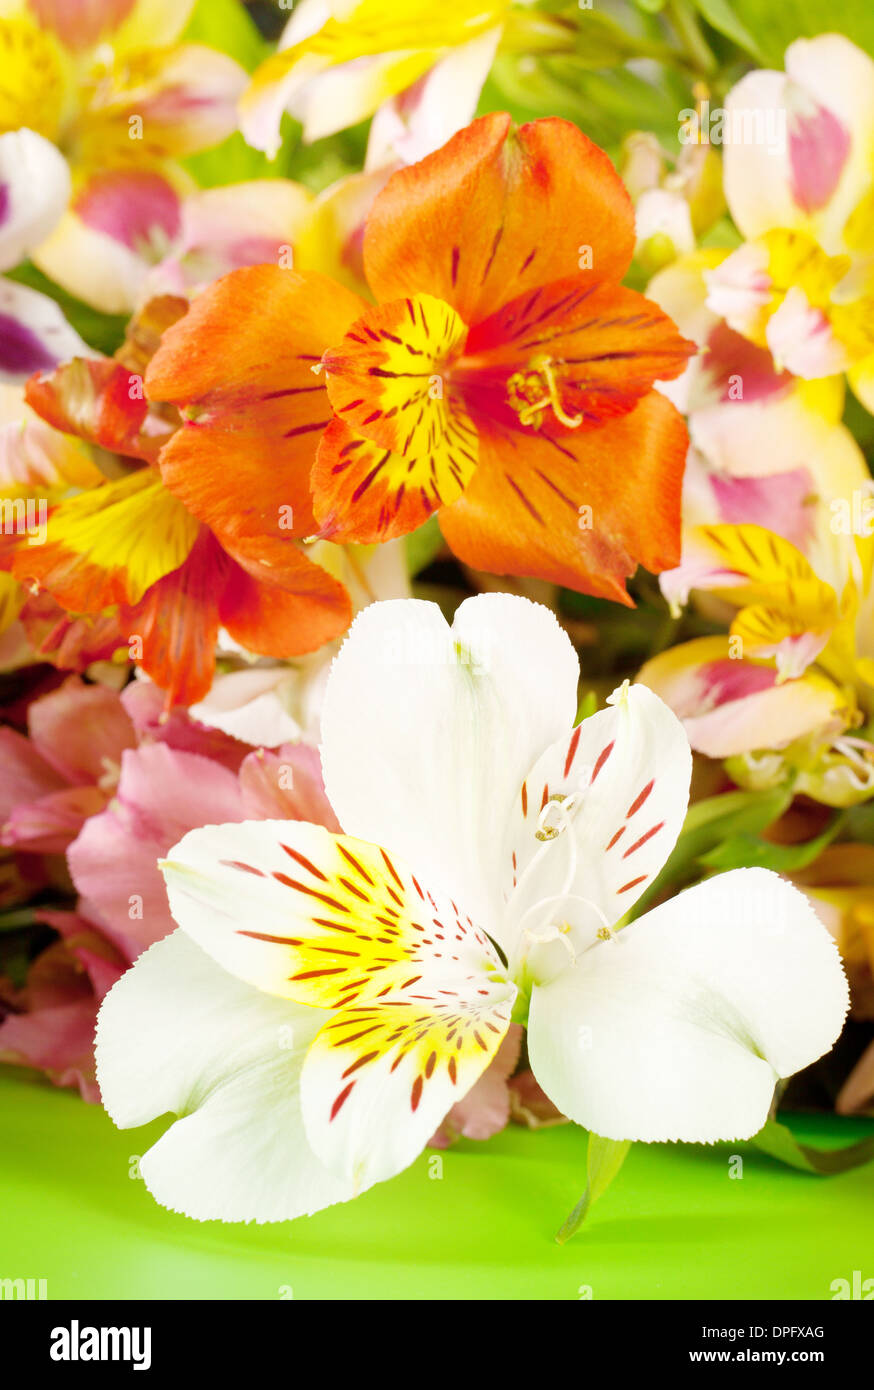 The bright white alstroemeria with a blurred background Stock Photo